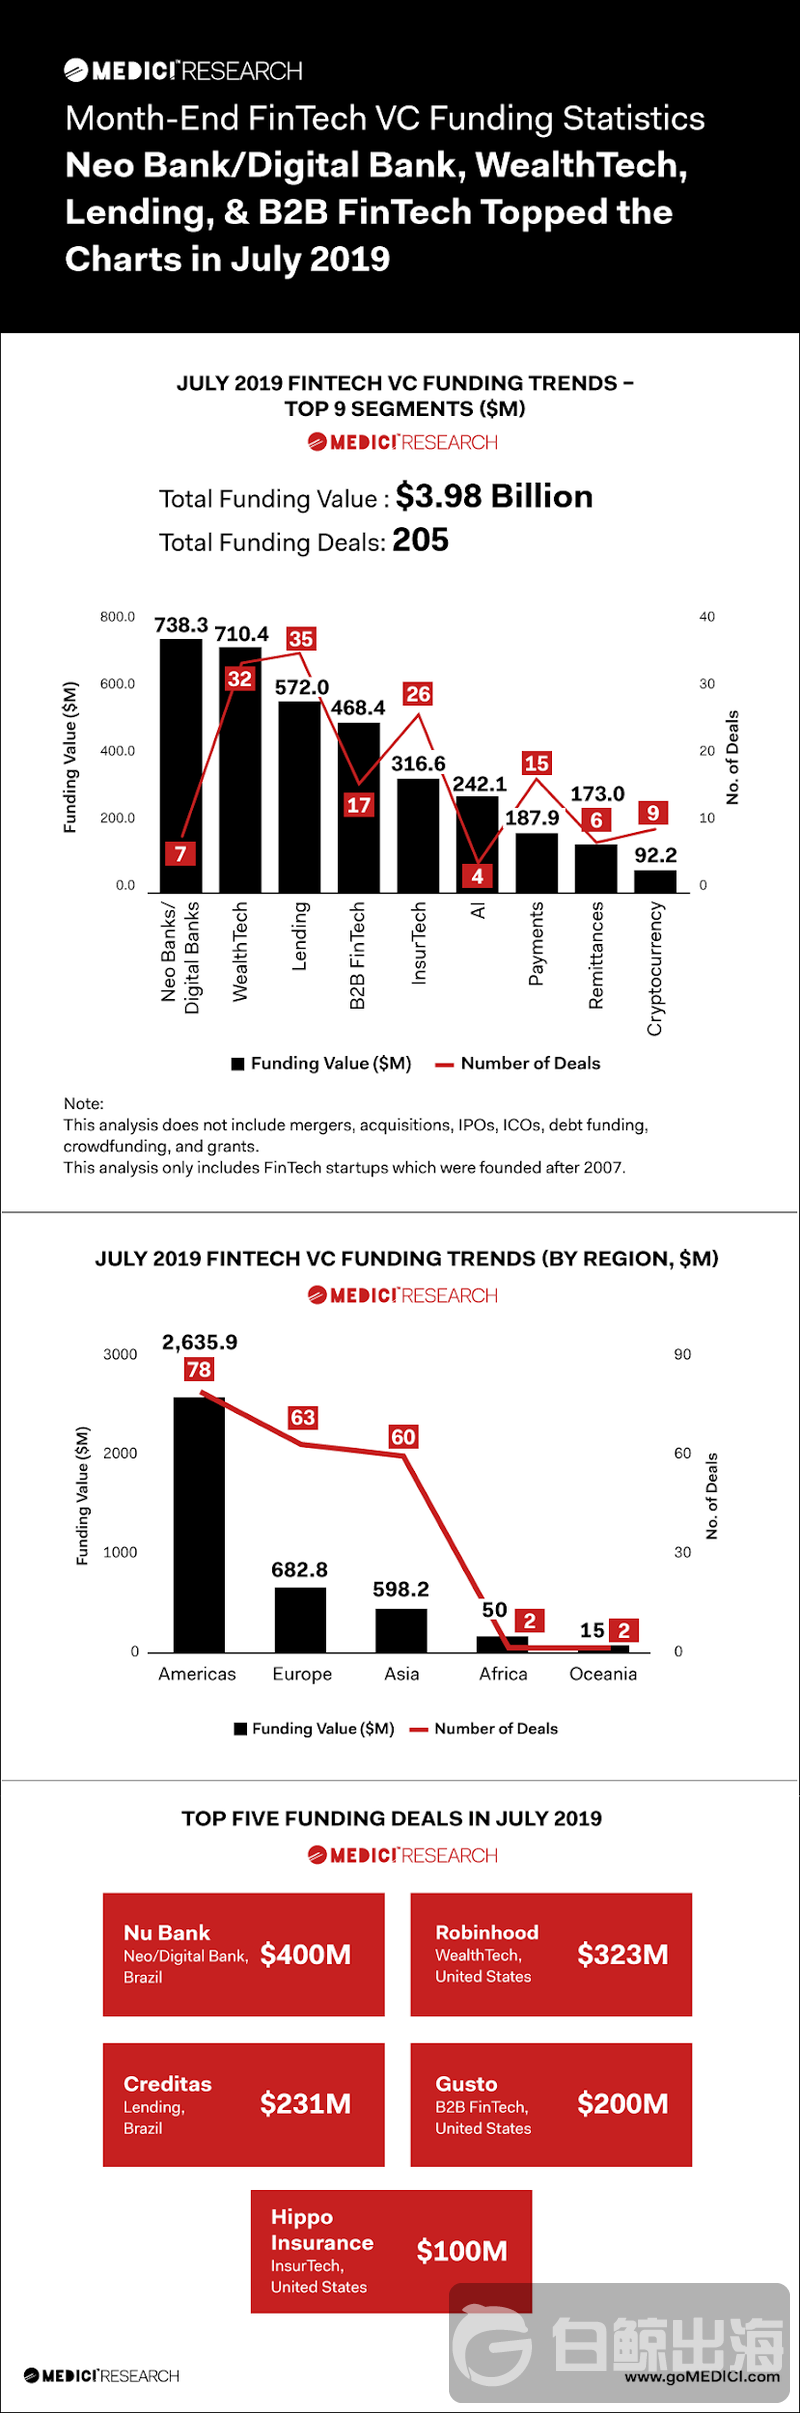 content_month-end-fintech-vc-funding-statistics-july-2019-1.png